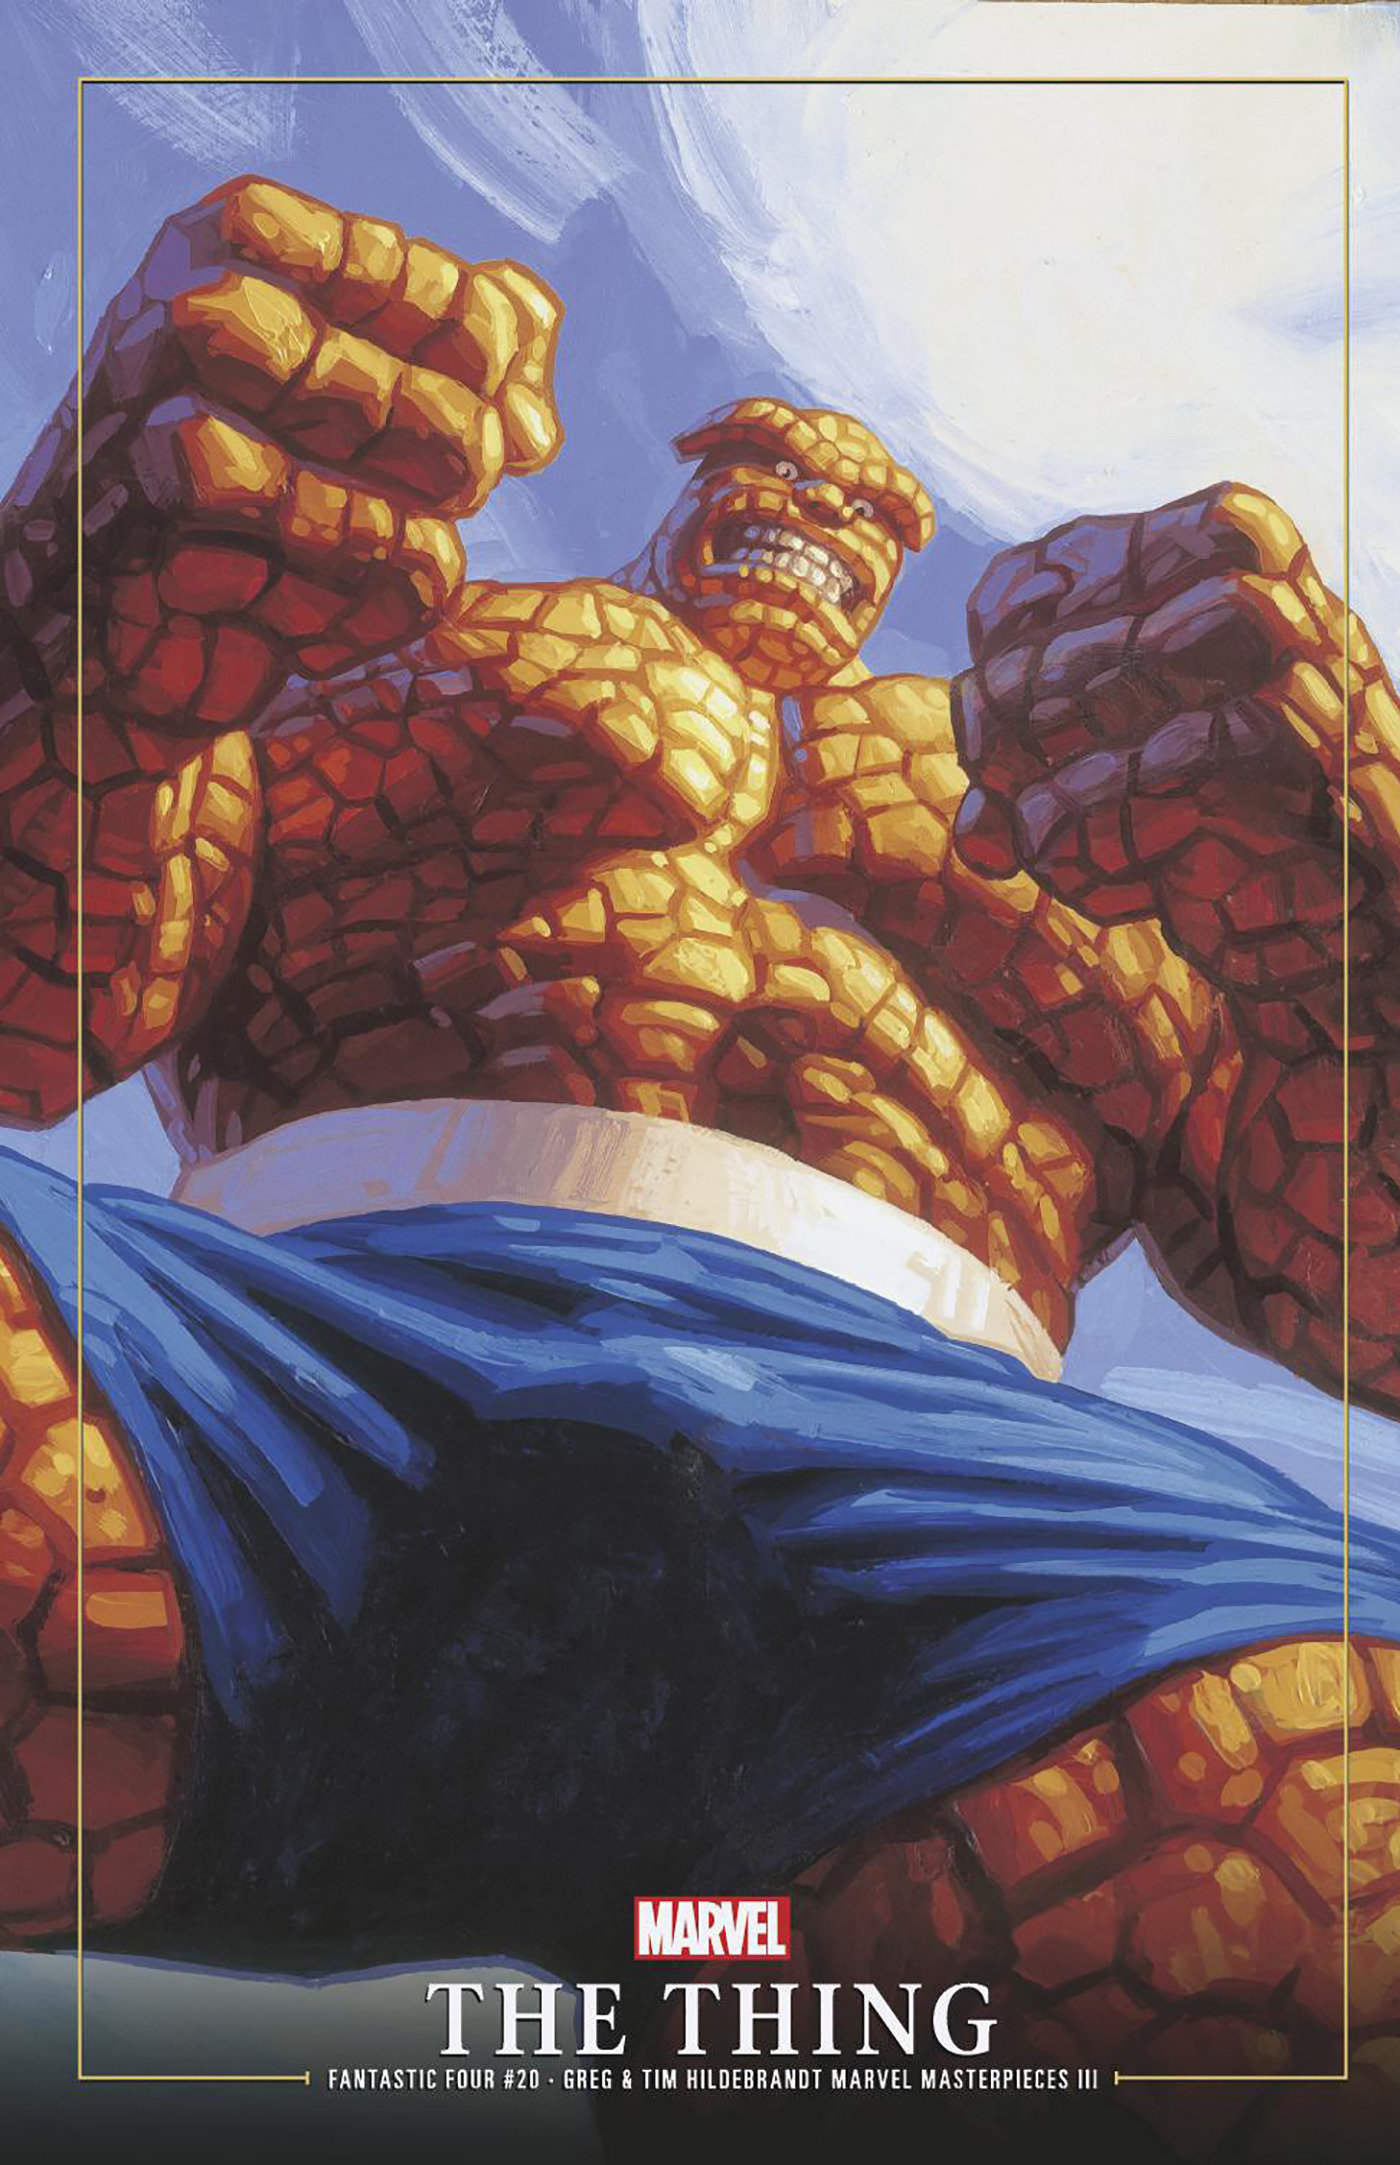 Fantastic Four #20 Greg And Tim Hildebrandt The Thing Marvel Masterpieces III Variant